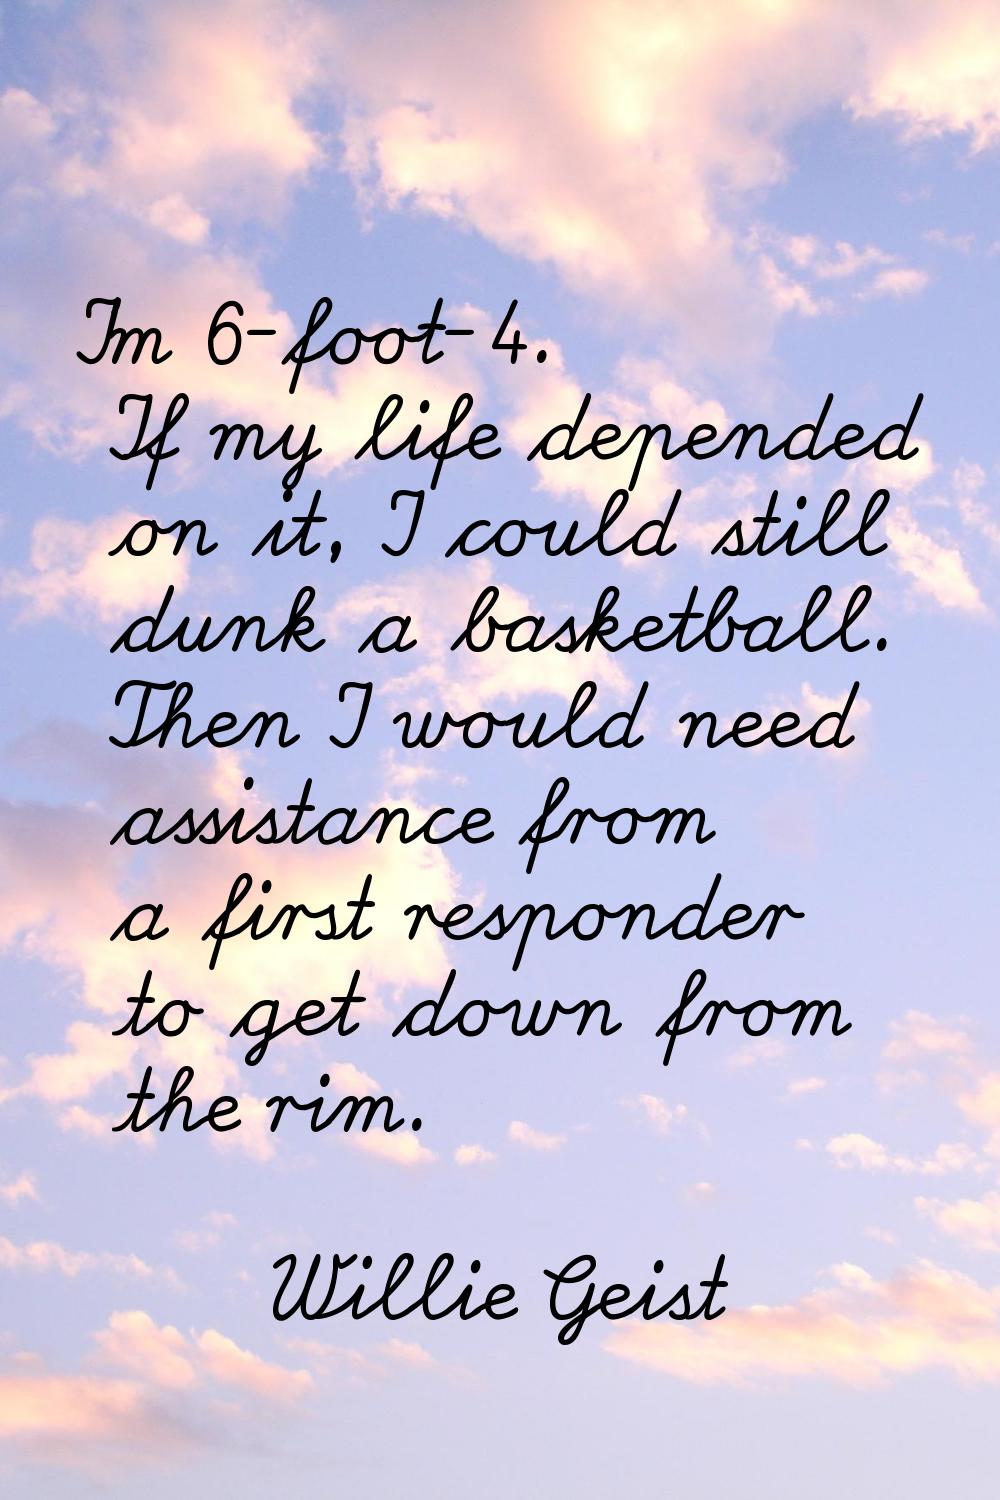 I'm 6-foot-4. If my life depended on it, I could still dunk a basketball. Then I would need assista